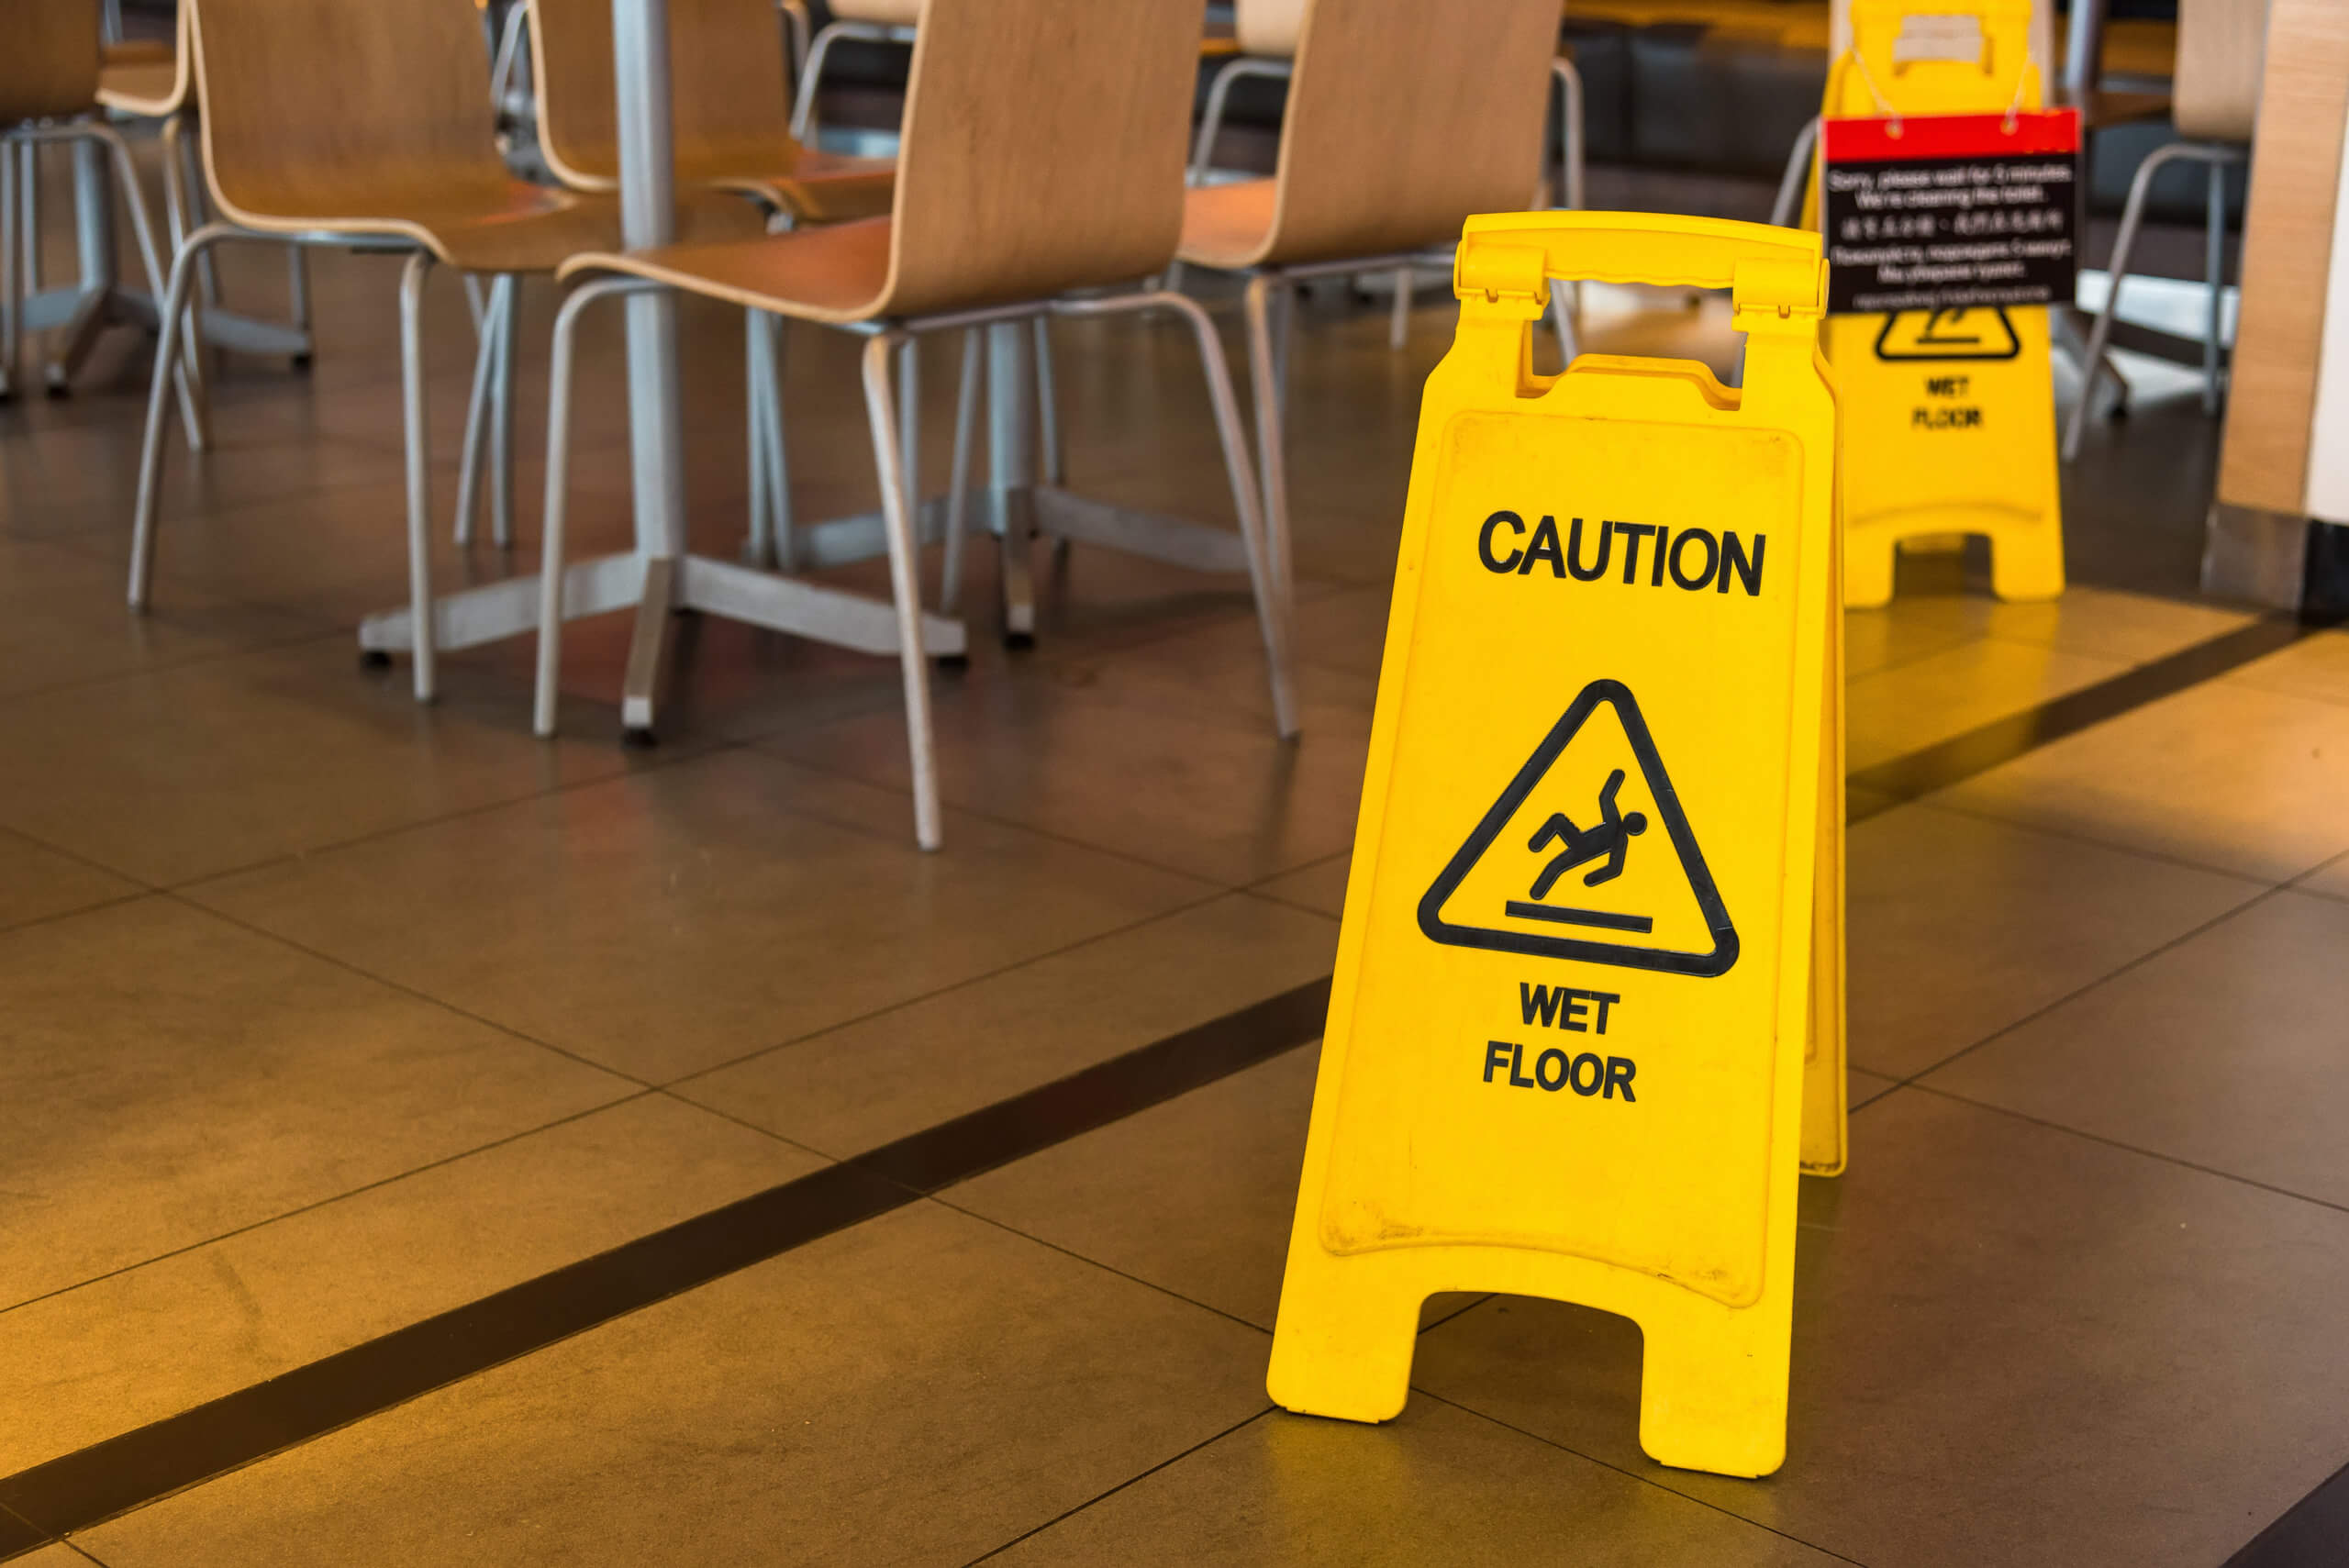 Did You Suffer a Slip and Fall at Mcdonalds?